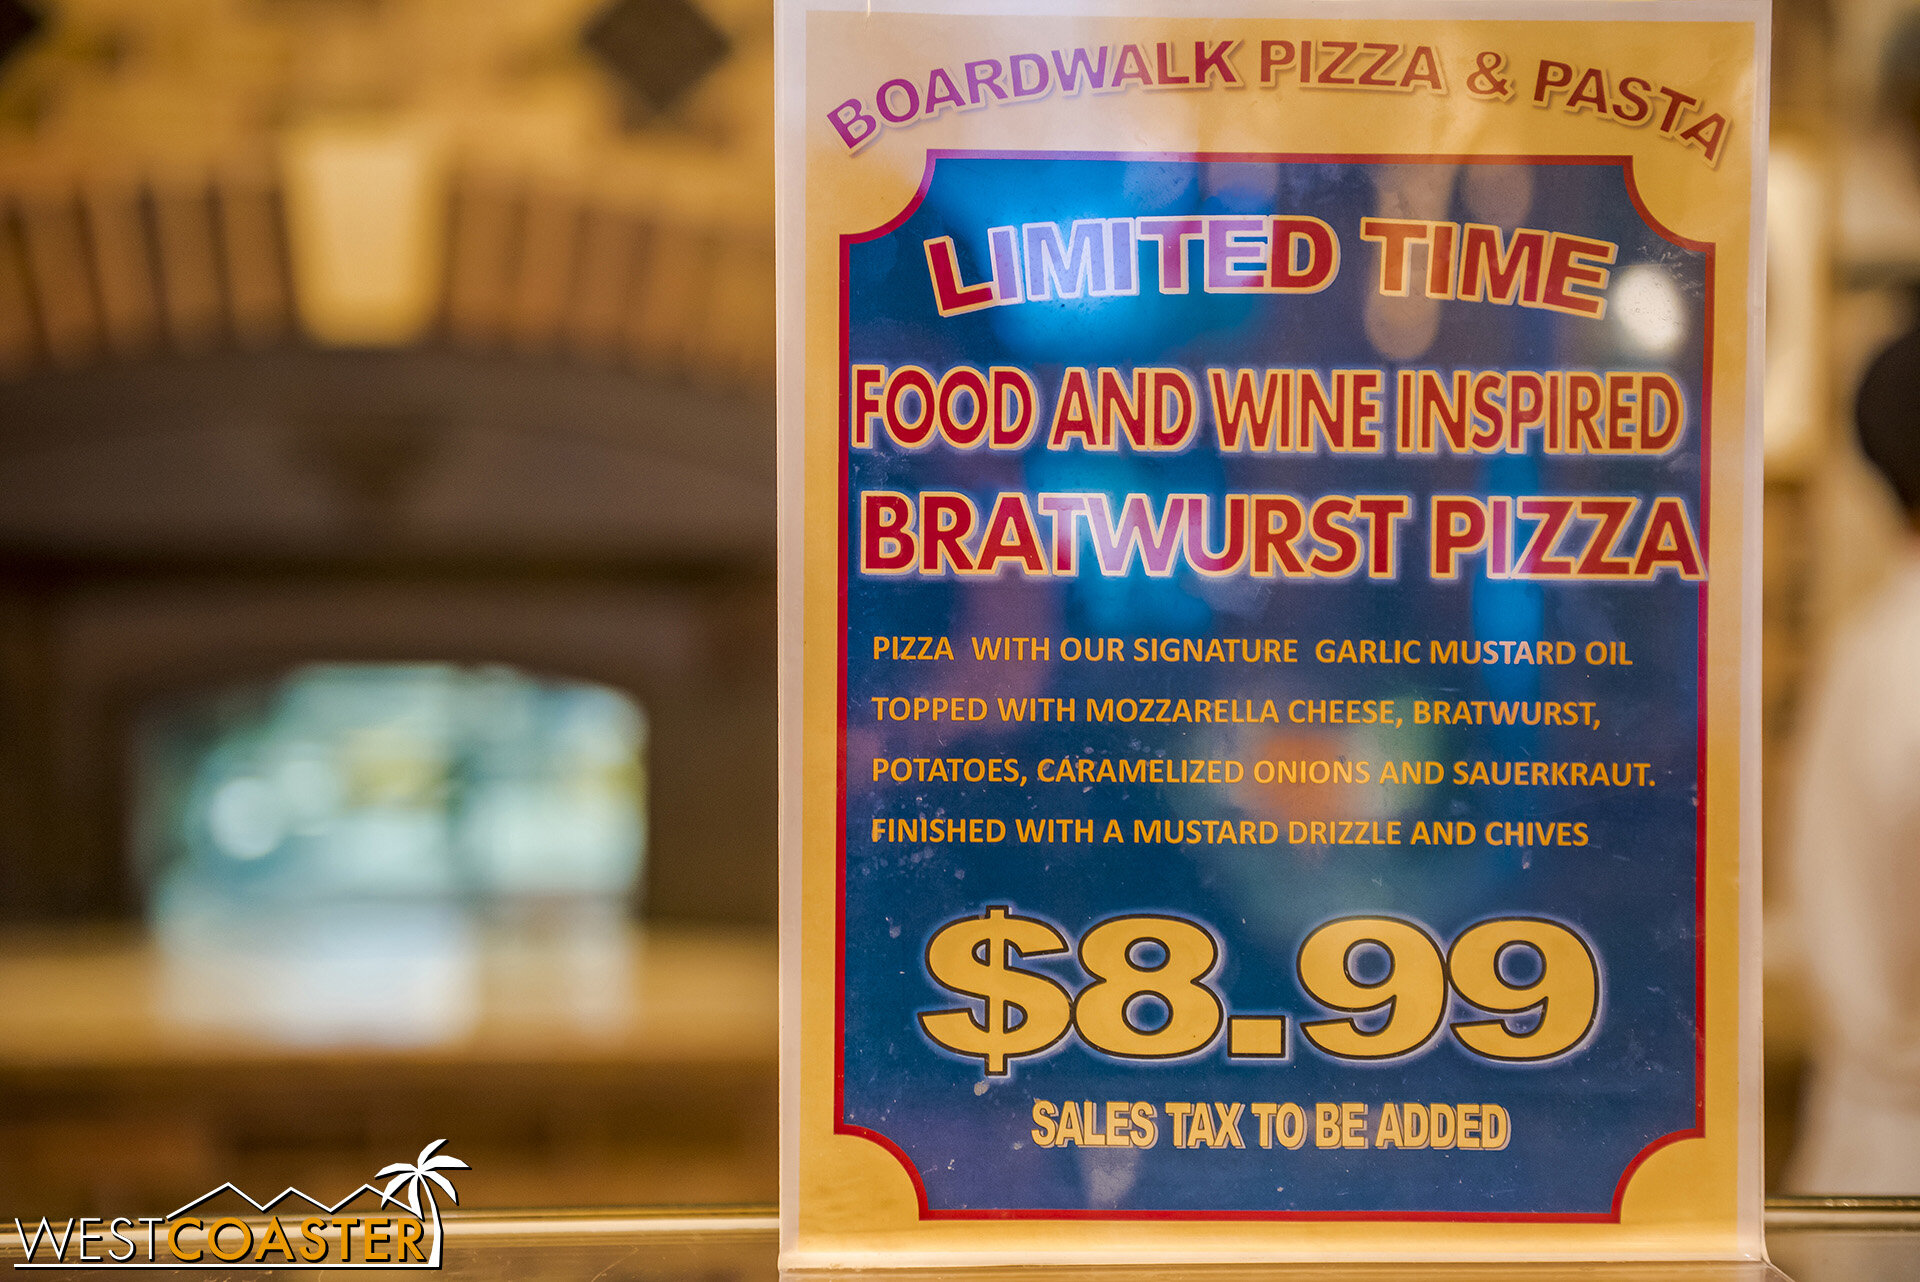  The seasonal pizza of the month at Boardwalk Pizza looks delicious! 